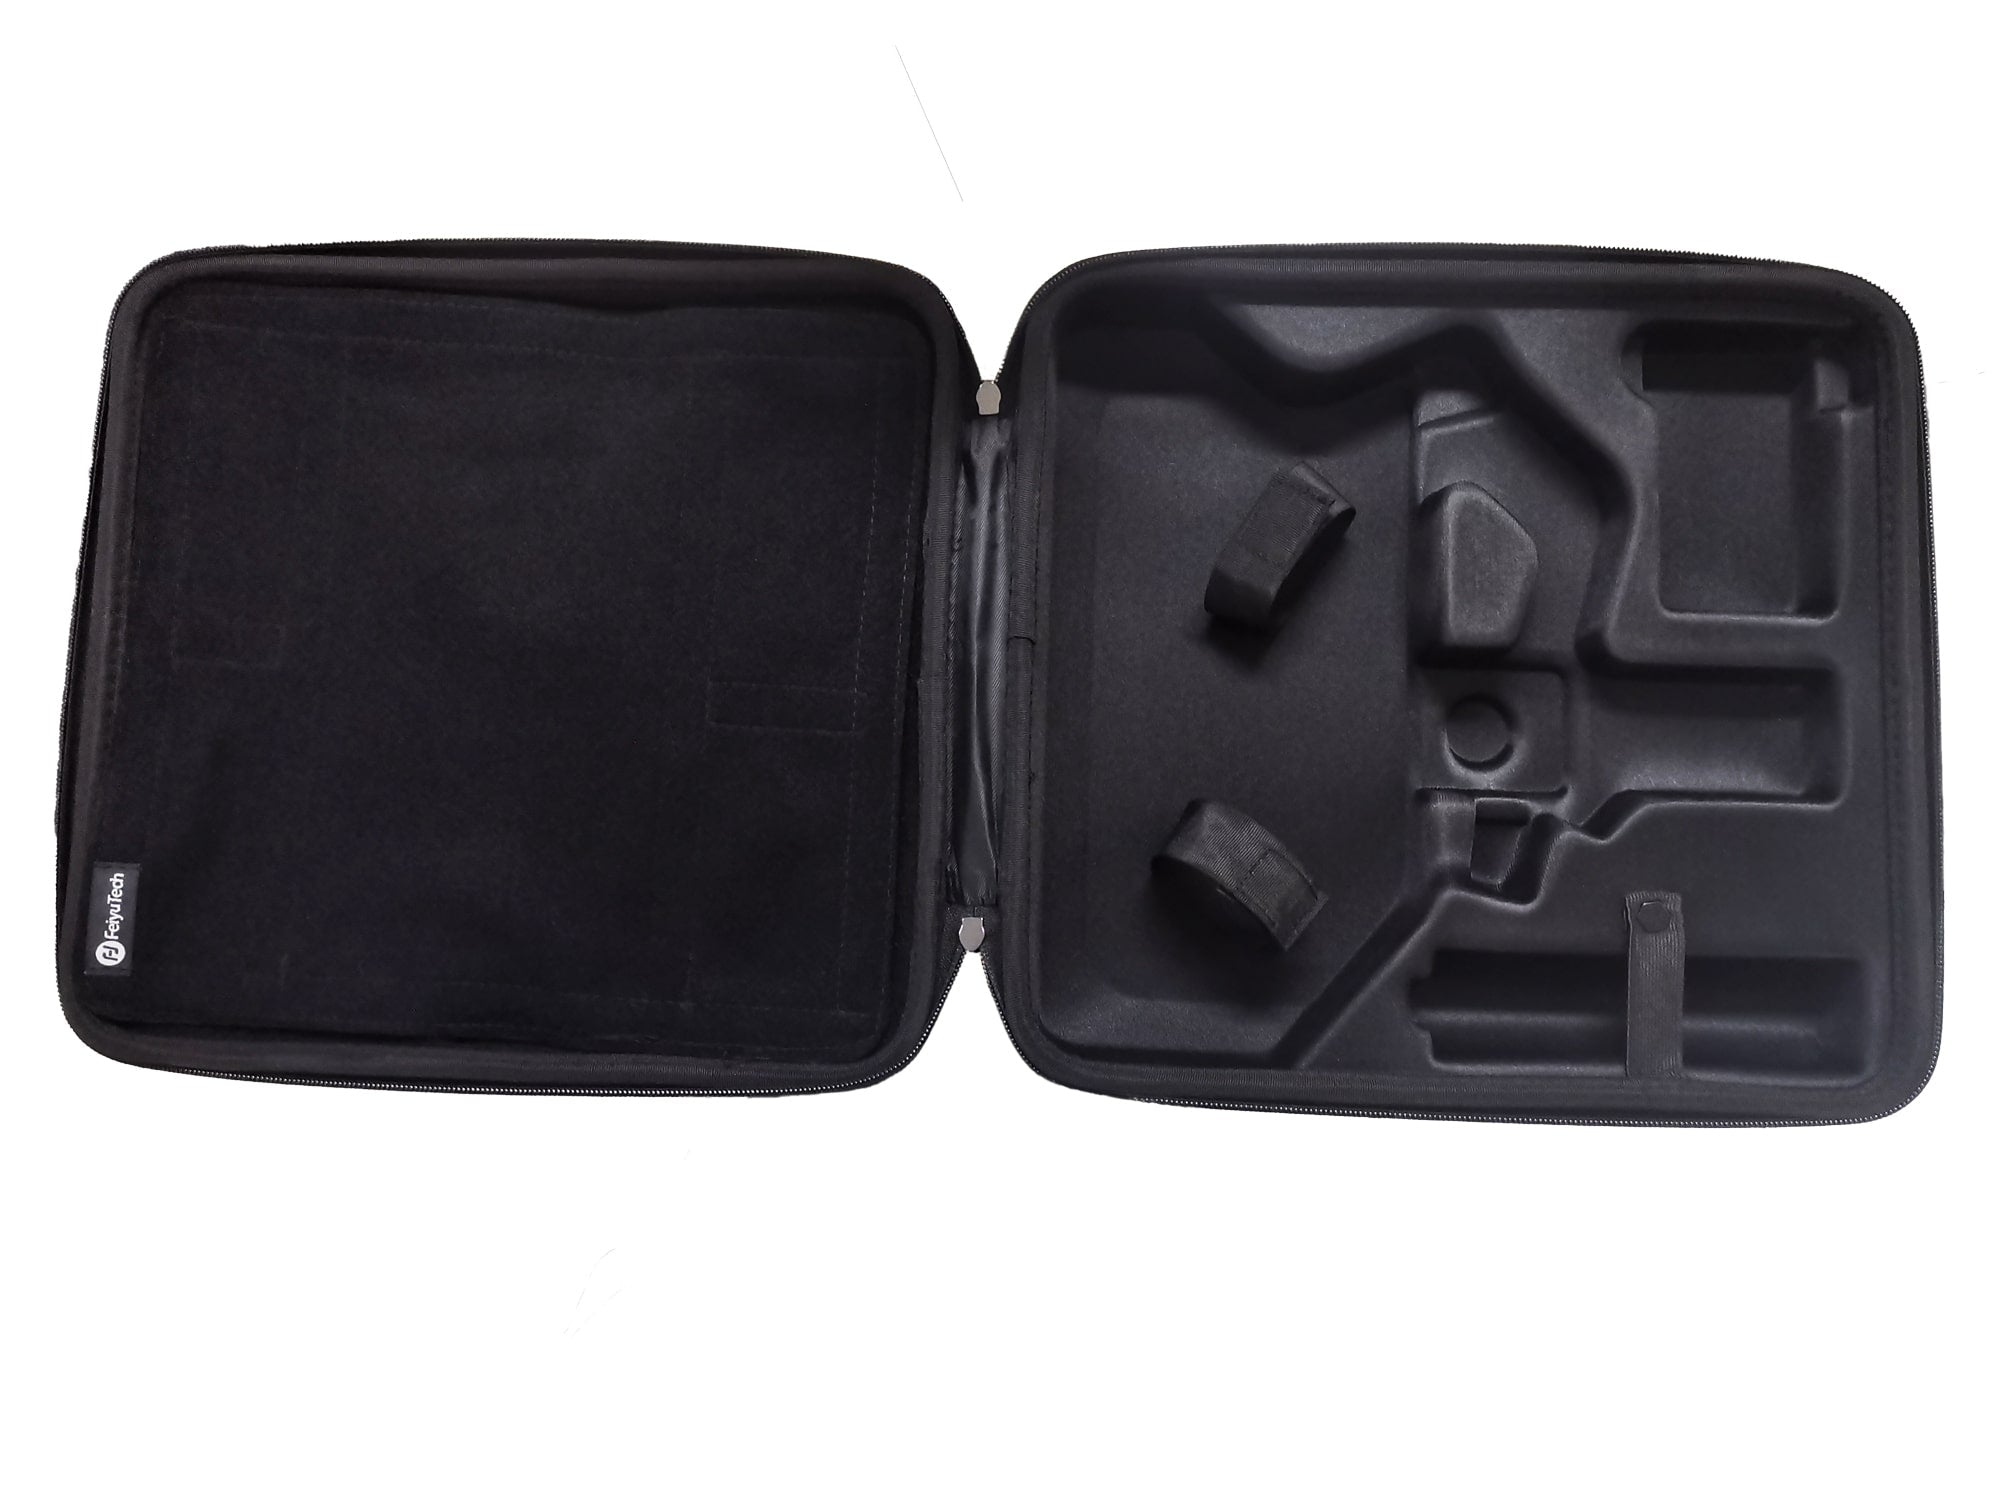 Carrying Case Portable Bag for SCORP Mini